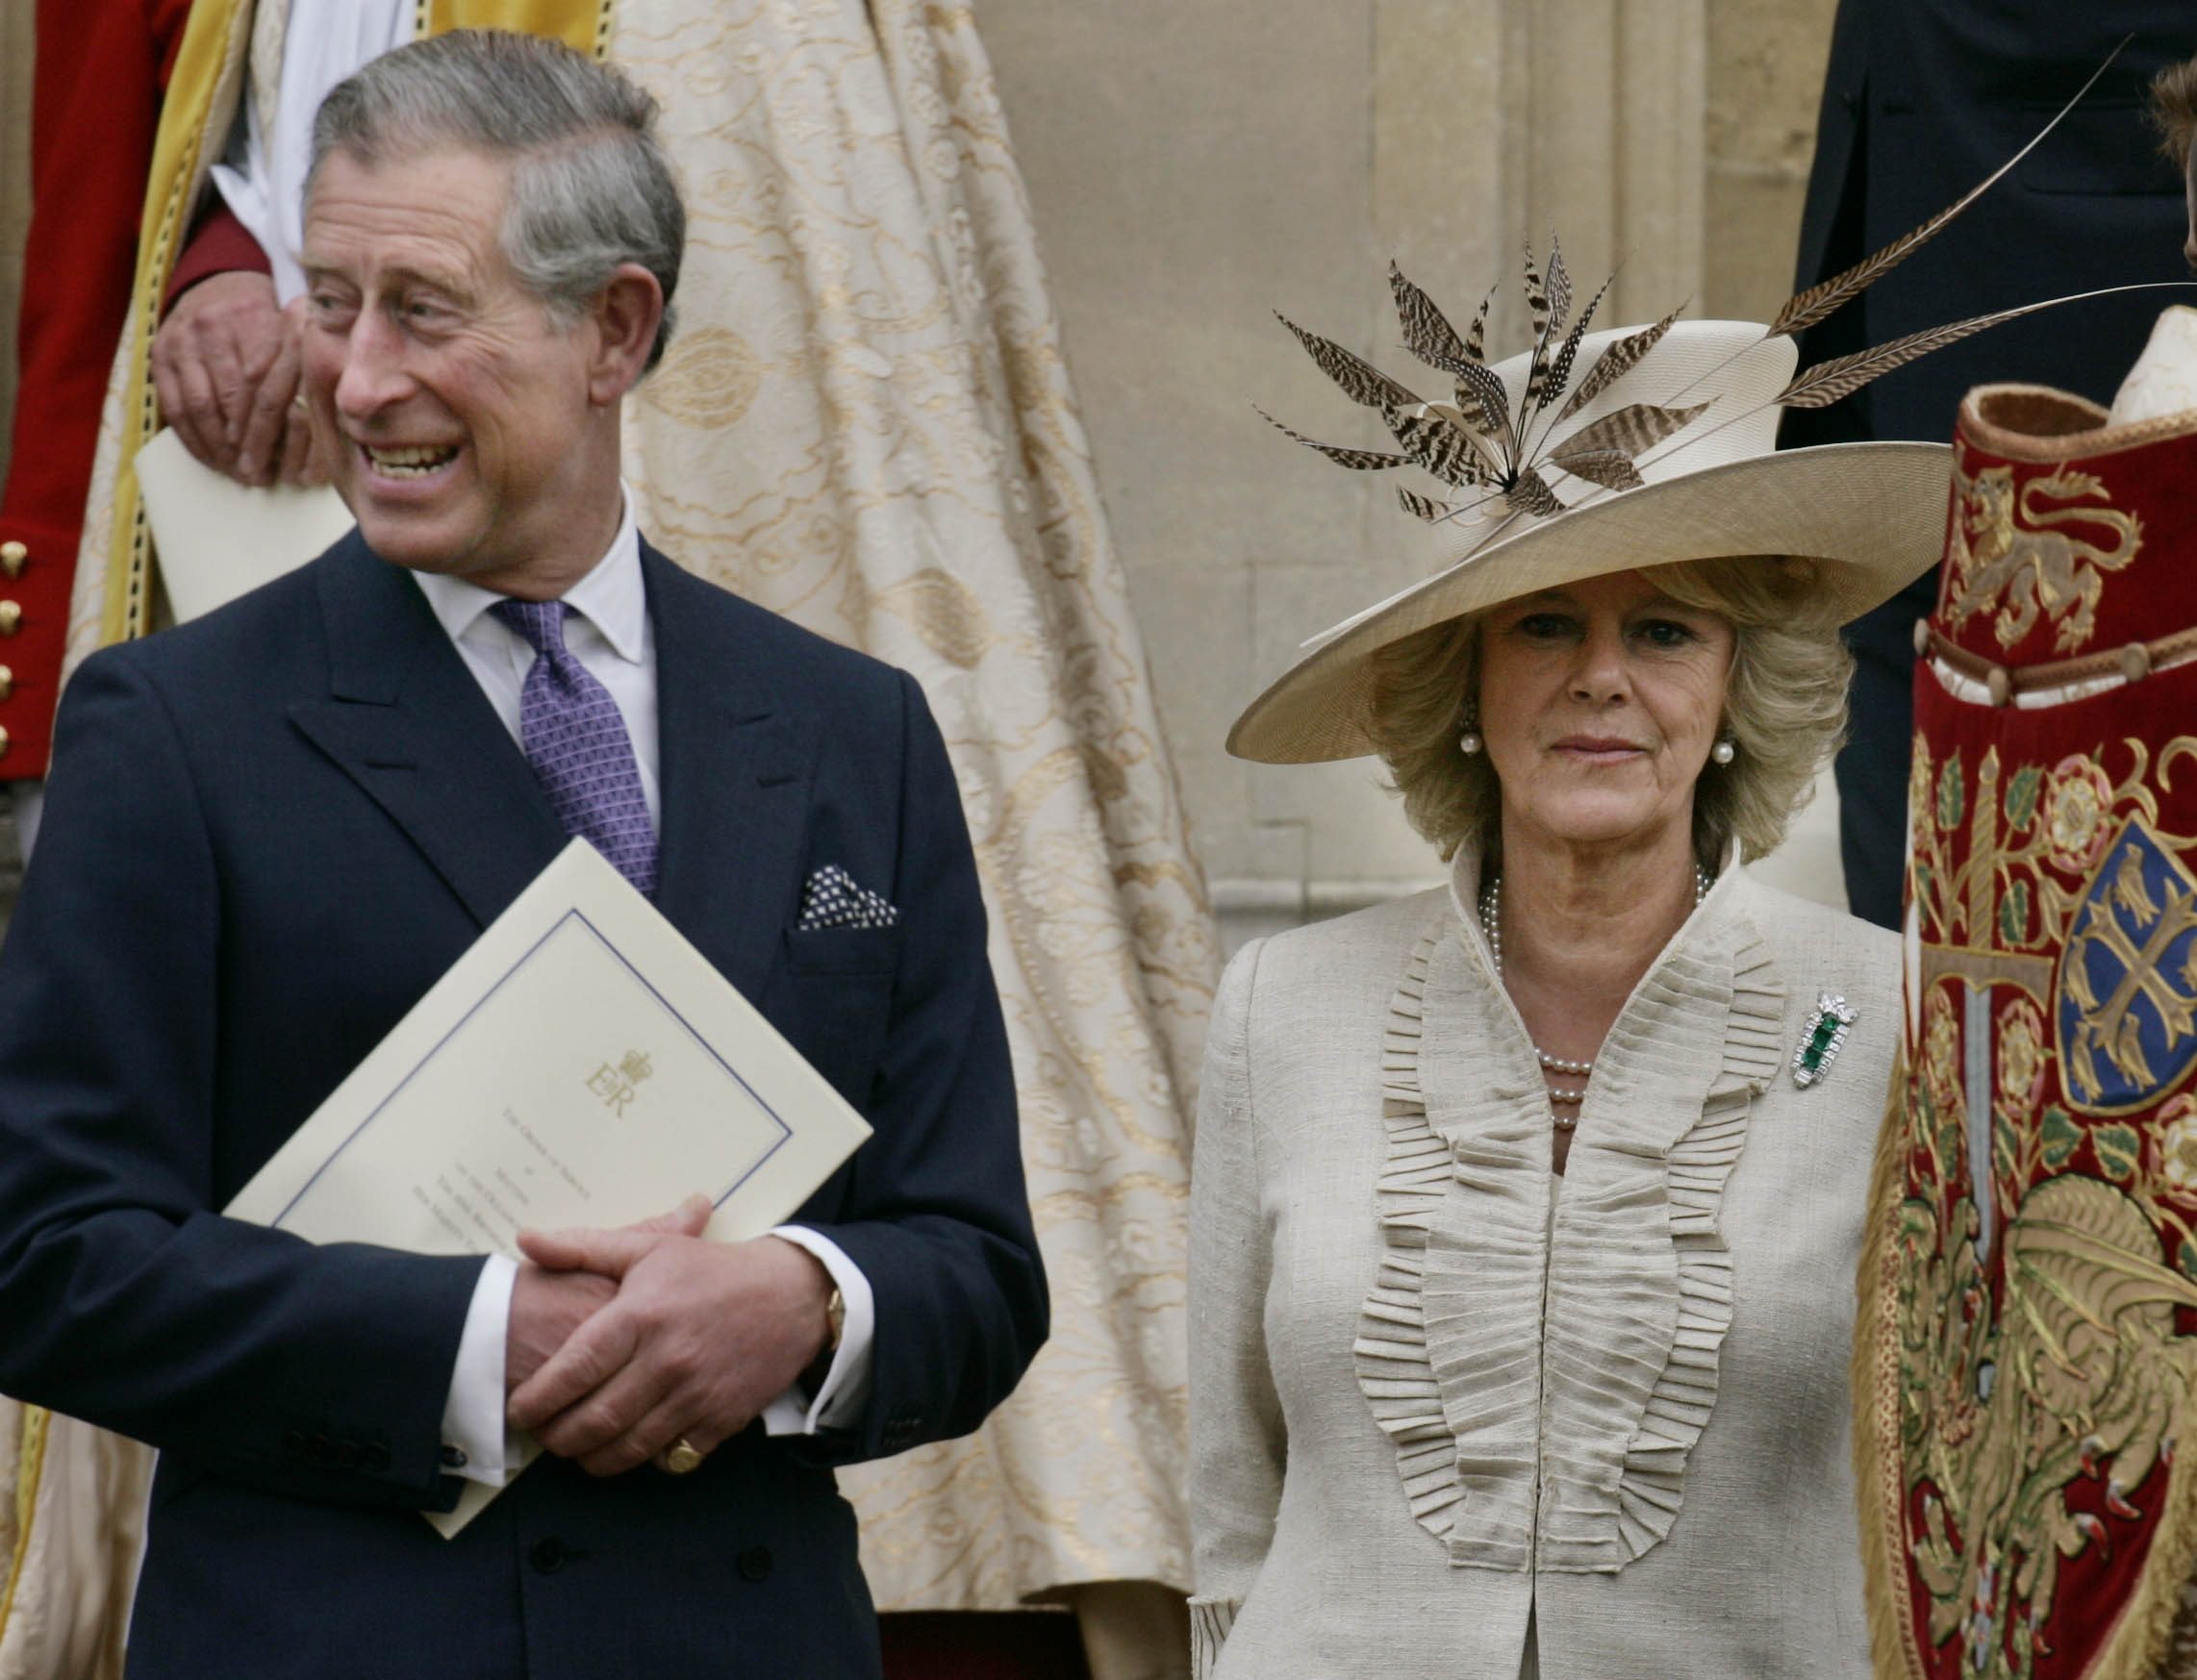 Mandatory Credit: Photo by Lefteris Pitarakis/AP/Shutterstock (7393615a) Prince Charles, Camilla, Duchess of Cornwall Britain's Prince Charles, left, and his wife Camilla, Duchess of Cornwall, leave Windsor Castle's St. Georges Chapel in Windsor, England, Sunday, April 23. 2006, following a special Service of Thanksgiving to celebrate Queen Elizabeth II's 80th birthday. Queen Elizabeth II, was born on and became Queen in February 1952 BRITAIN QUEEN'S 8OTH, WINDSOR, United Kingdom England